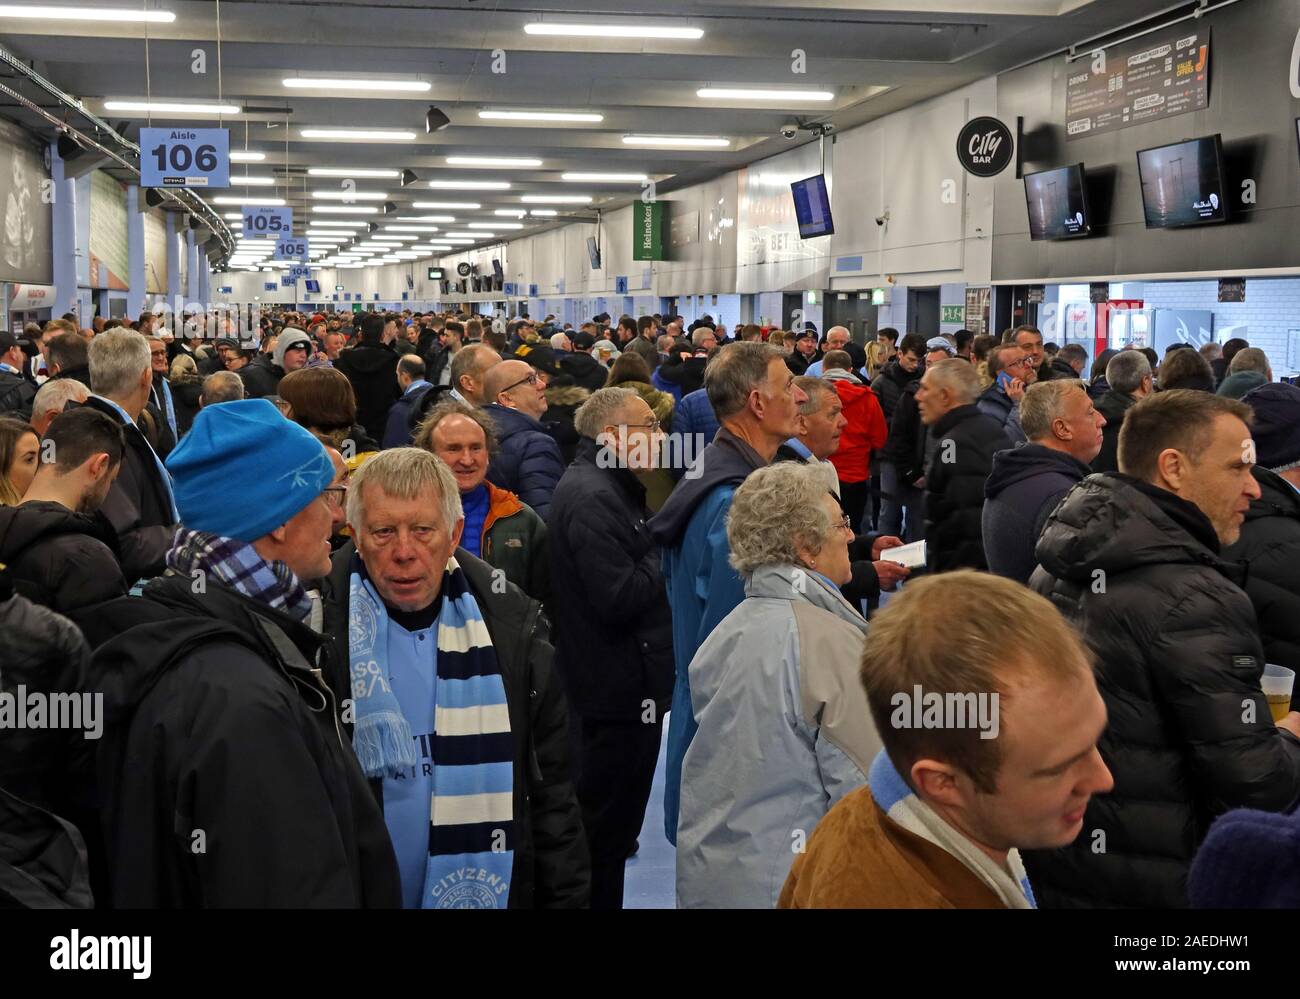 MCFC Supporters, Etihad Stadium, Manchester City football Club, match Banque D'Images